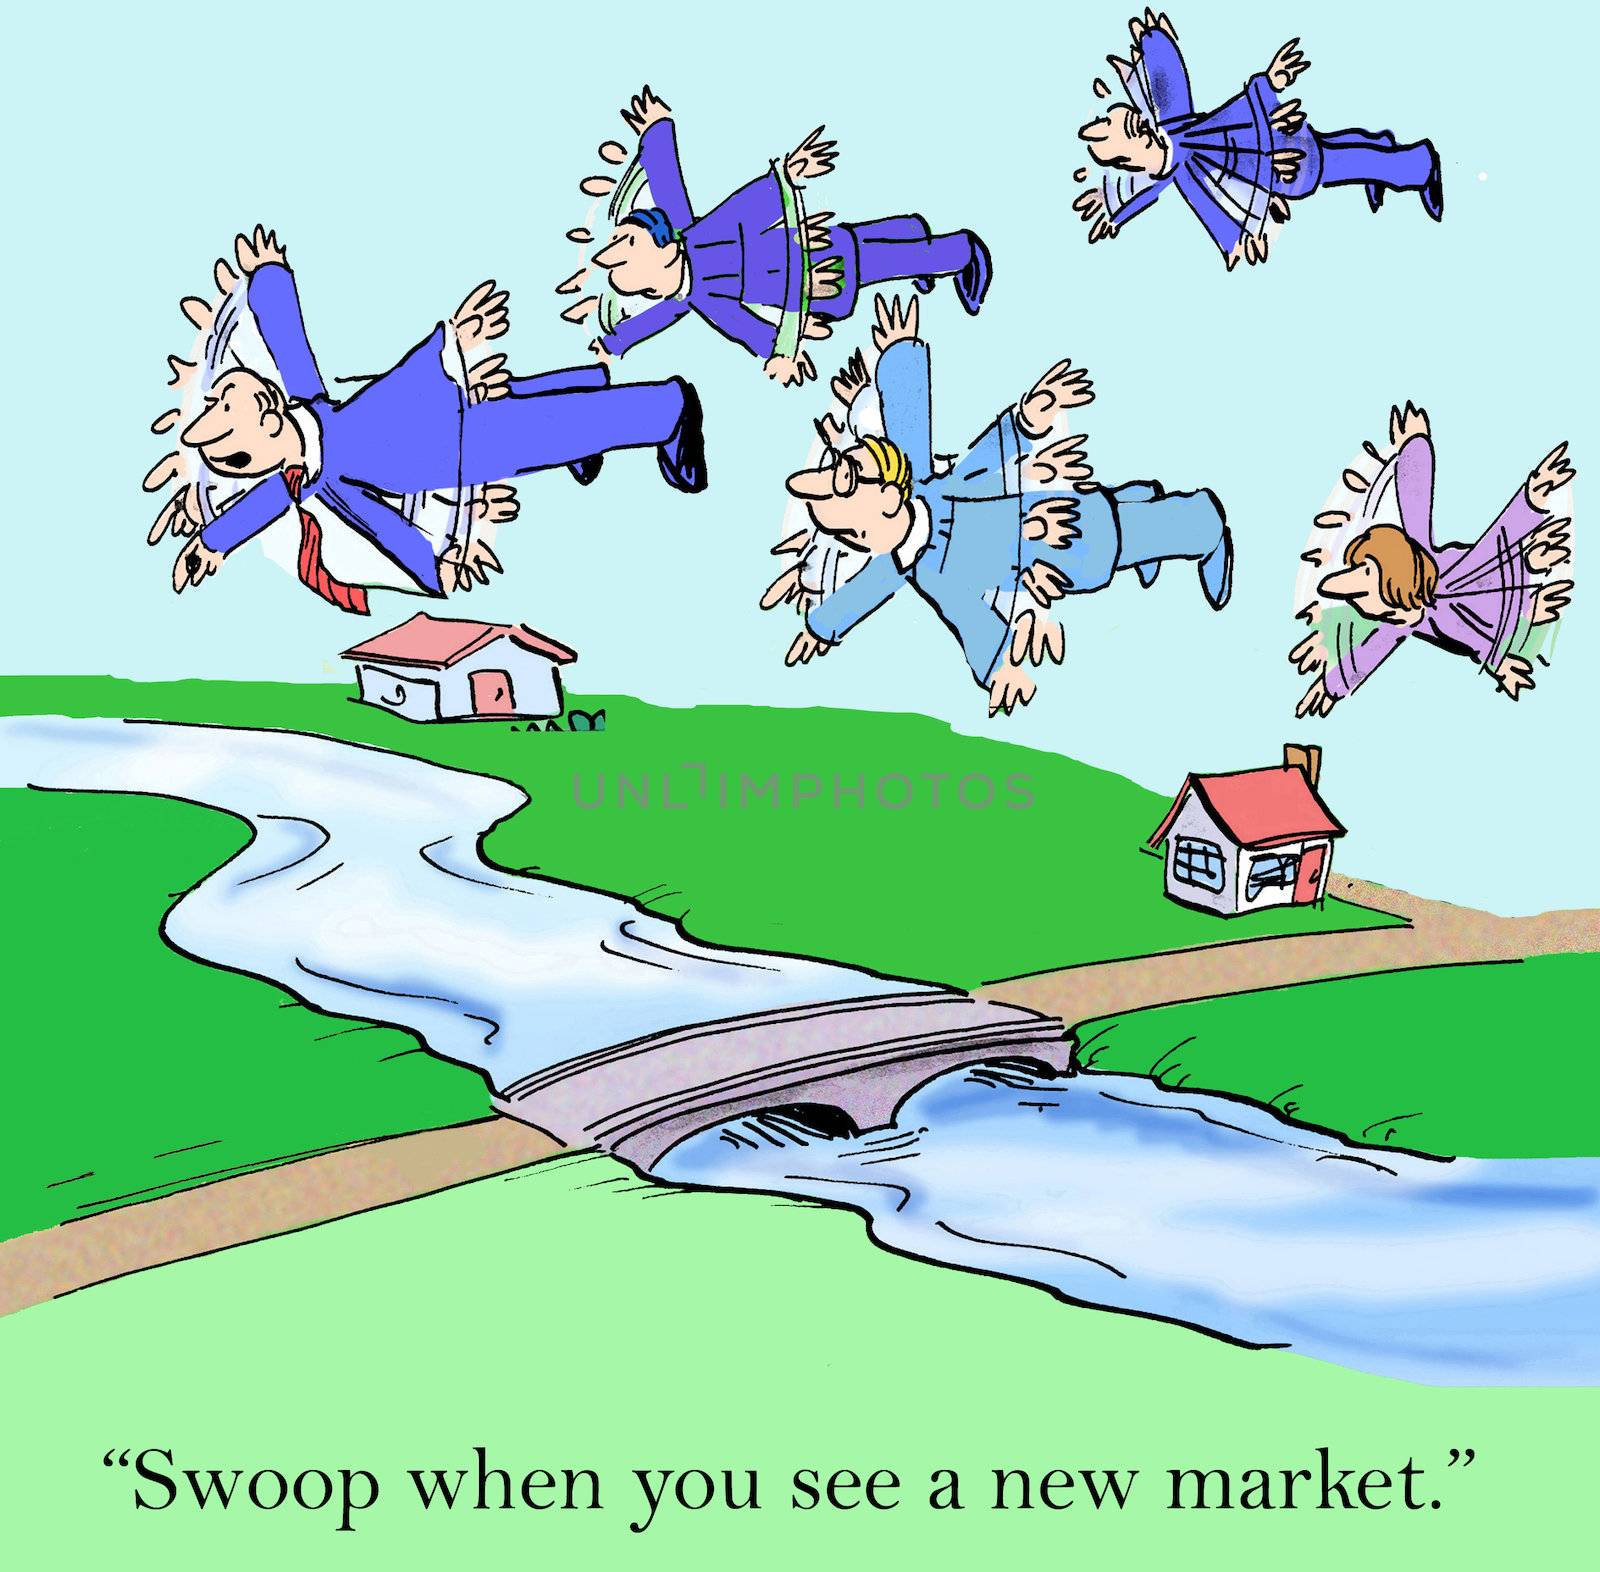 Feel free to swoop if you see a new market by andrewgenn